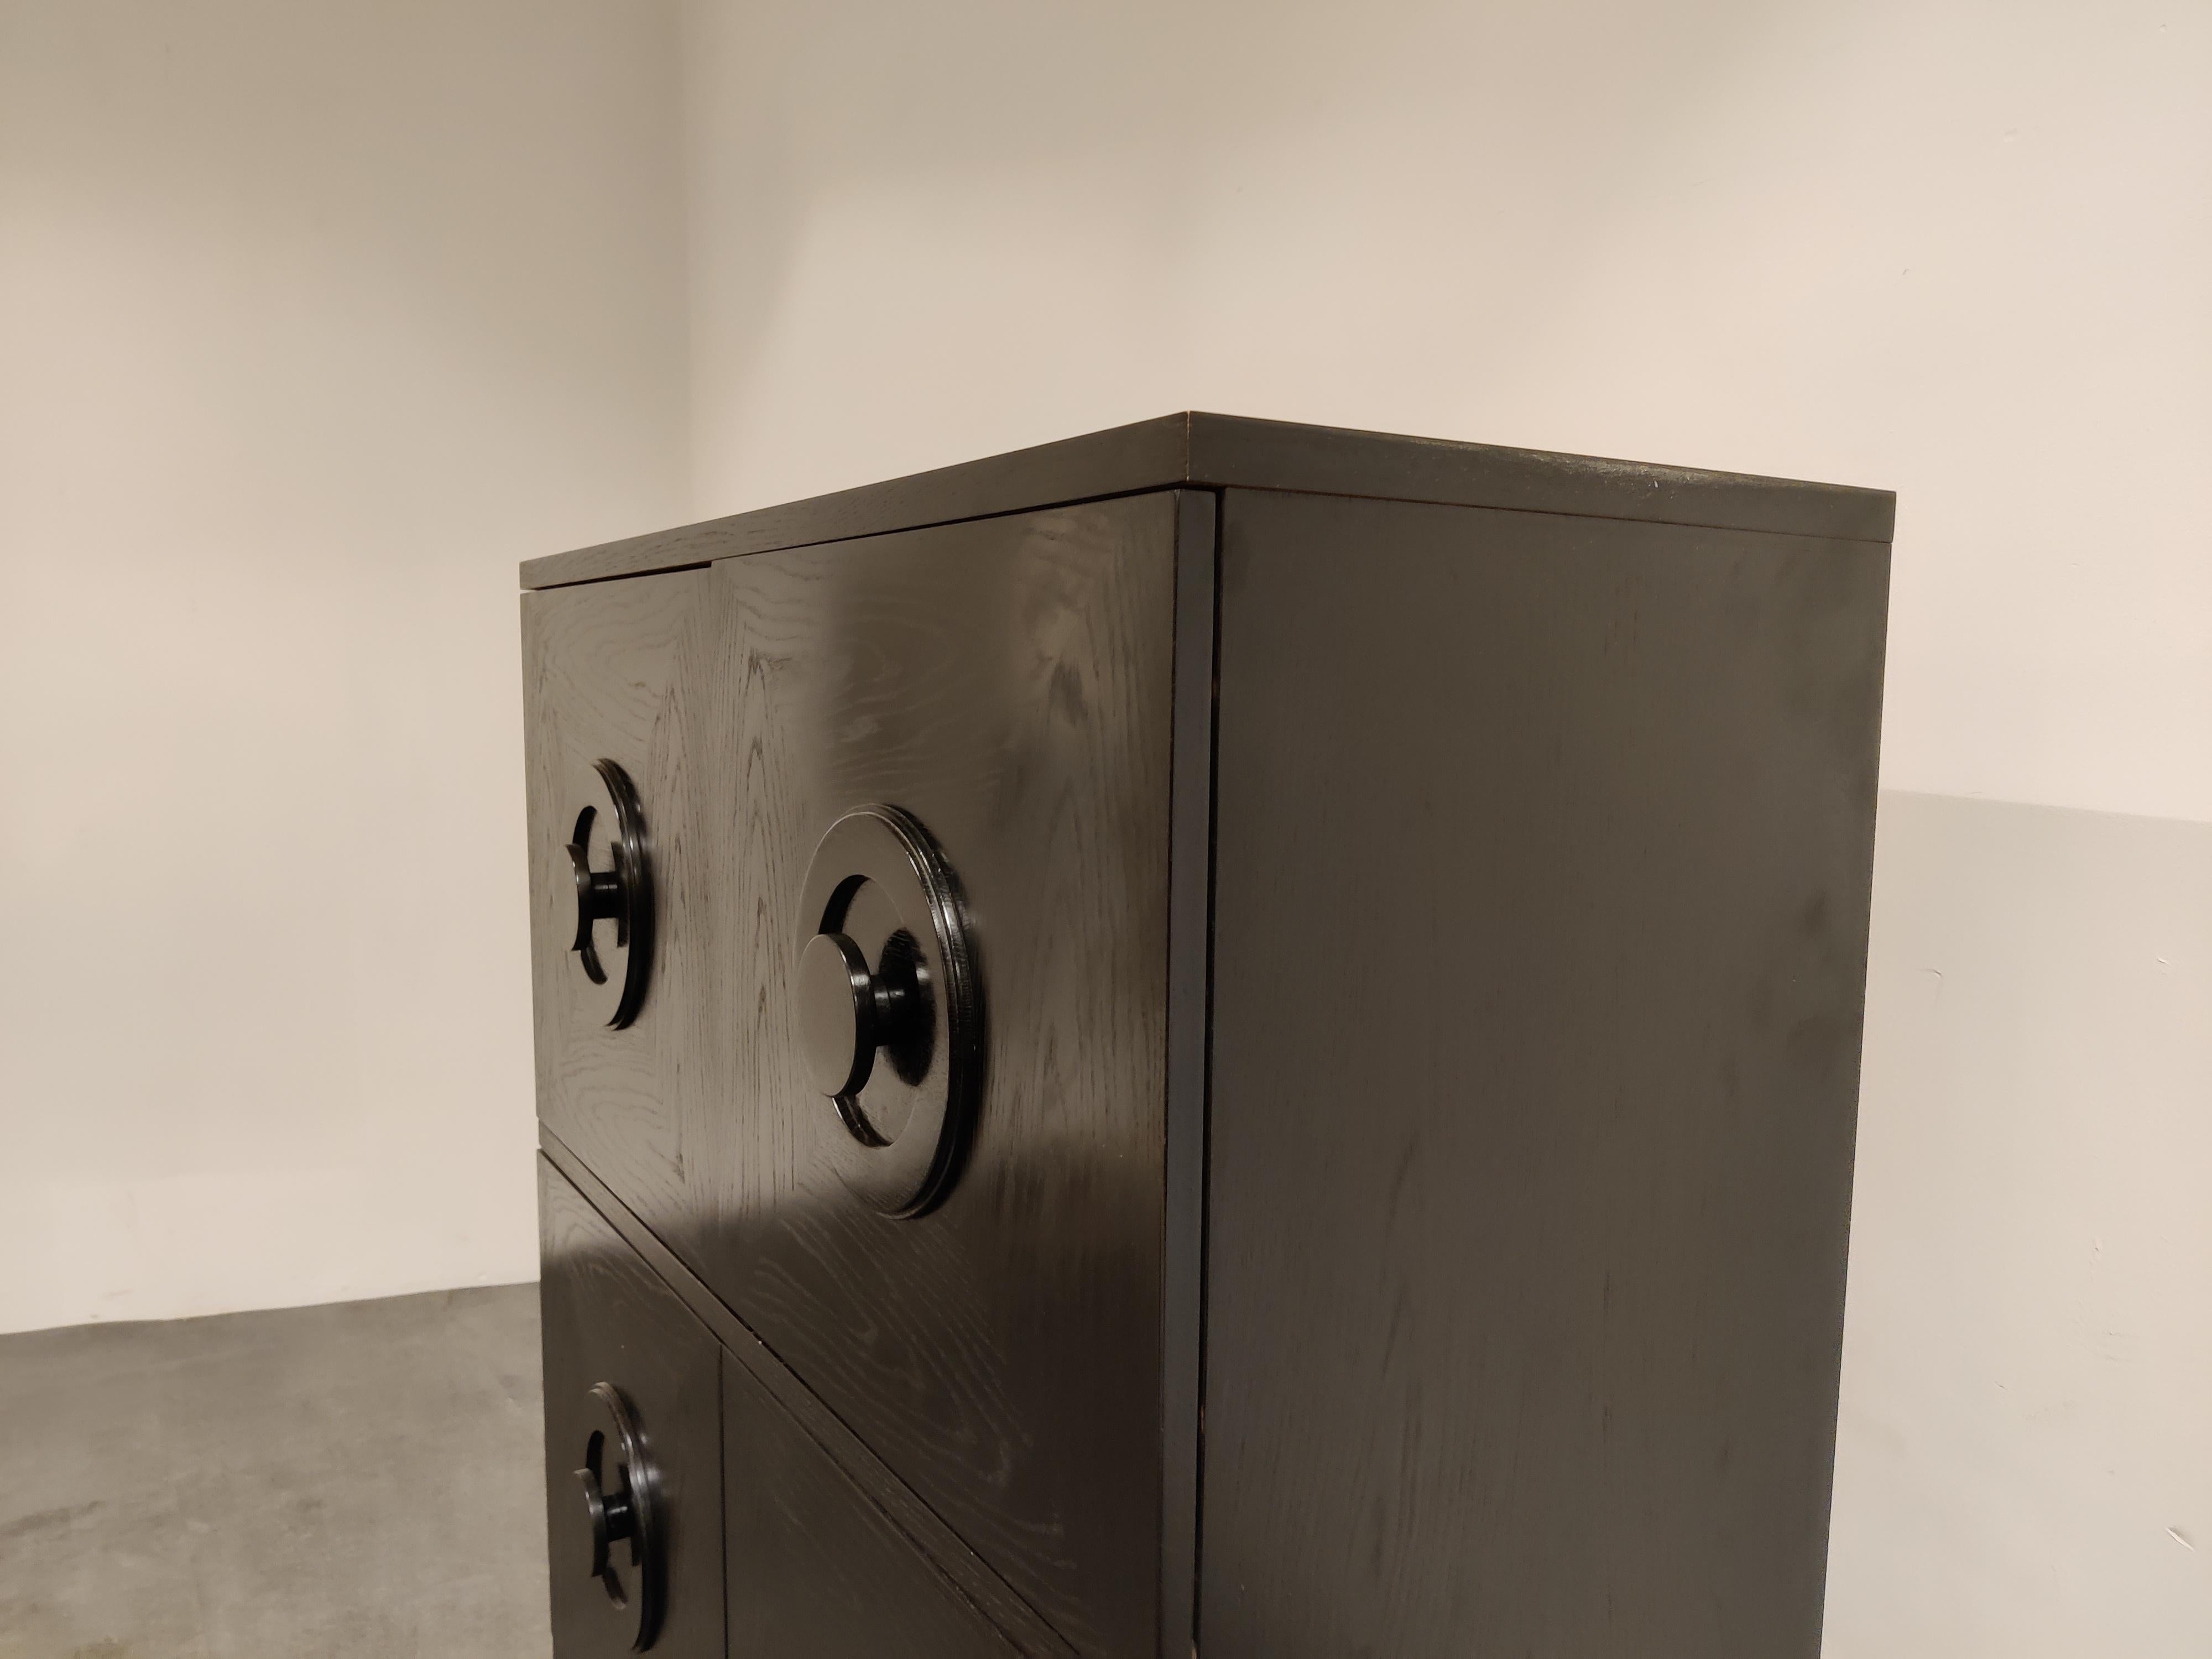 Beautiful black wenge wooden brutalist bar cabinet.

The cabinet consists of four doors and offers plenty of storage space.

Good condition.

1970s - Belgium
Dimensions:
Height: 121cm/47.63